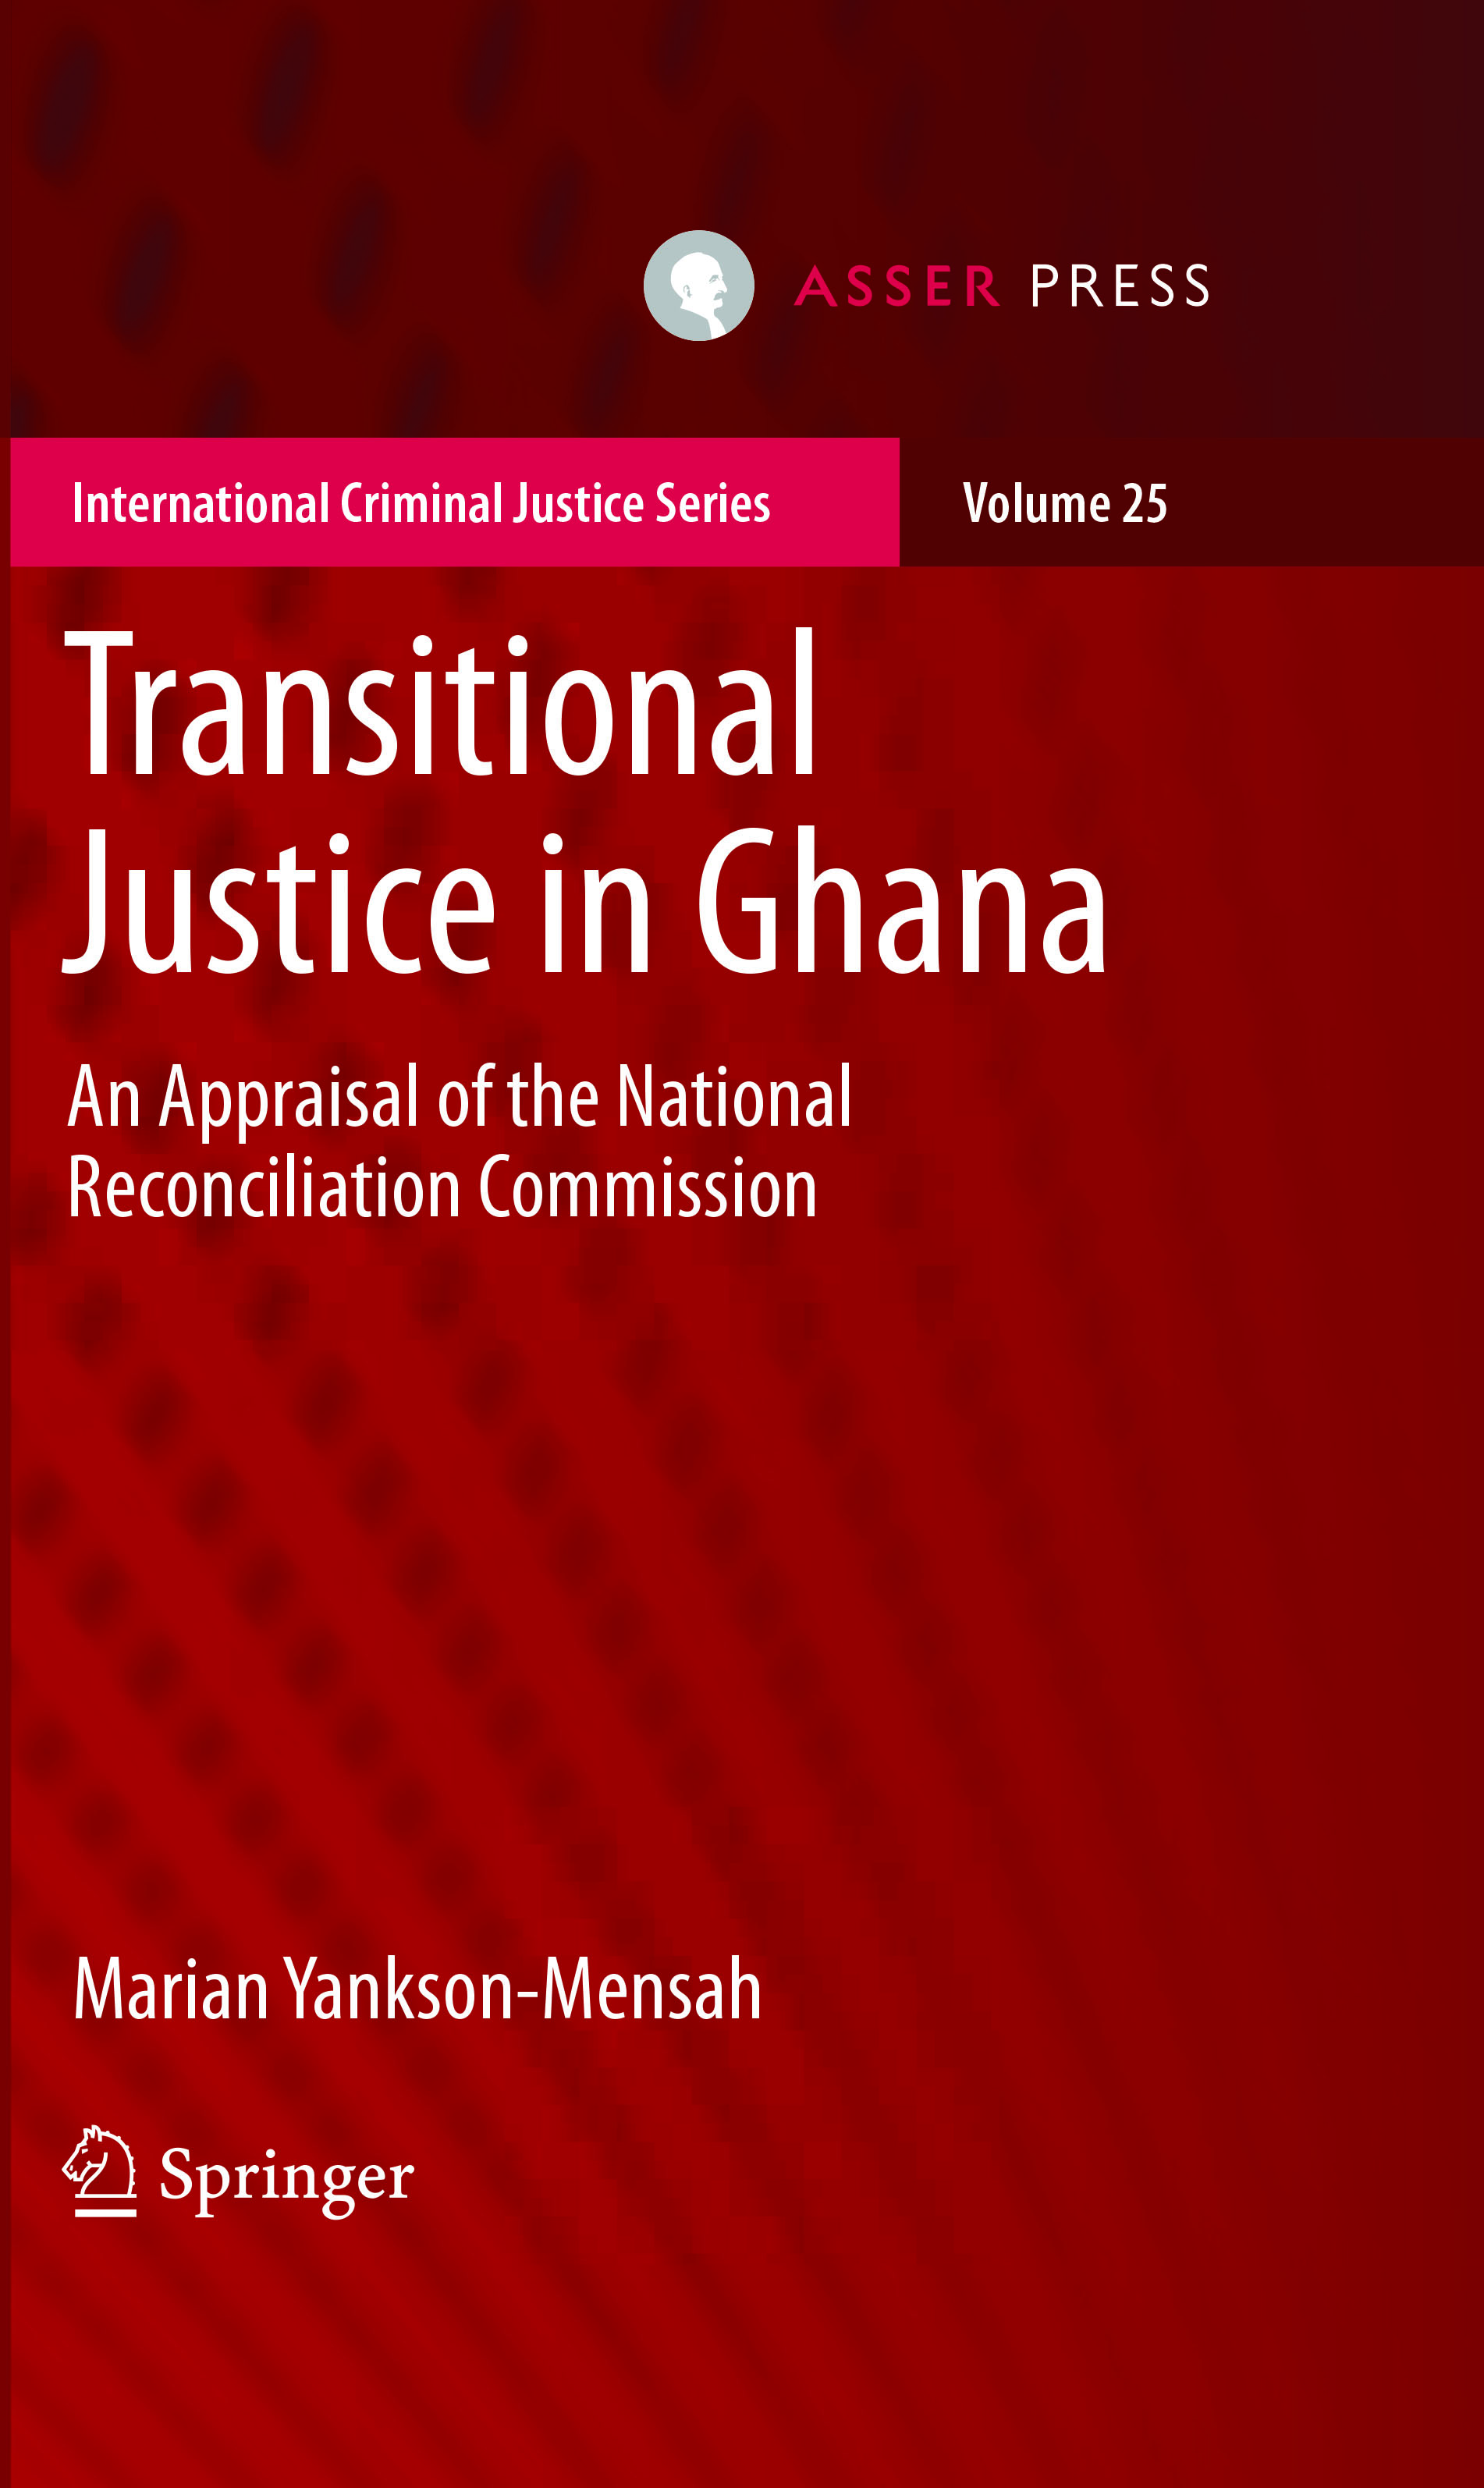 Transitional Justice in Ghana - An Appraisal of the National Reconciliation Commission